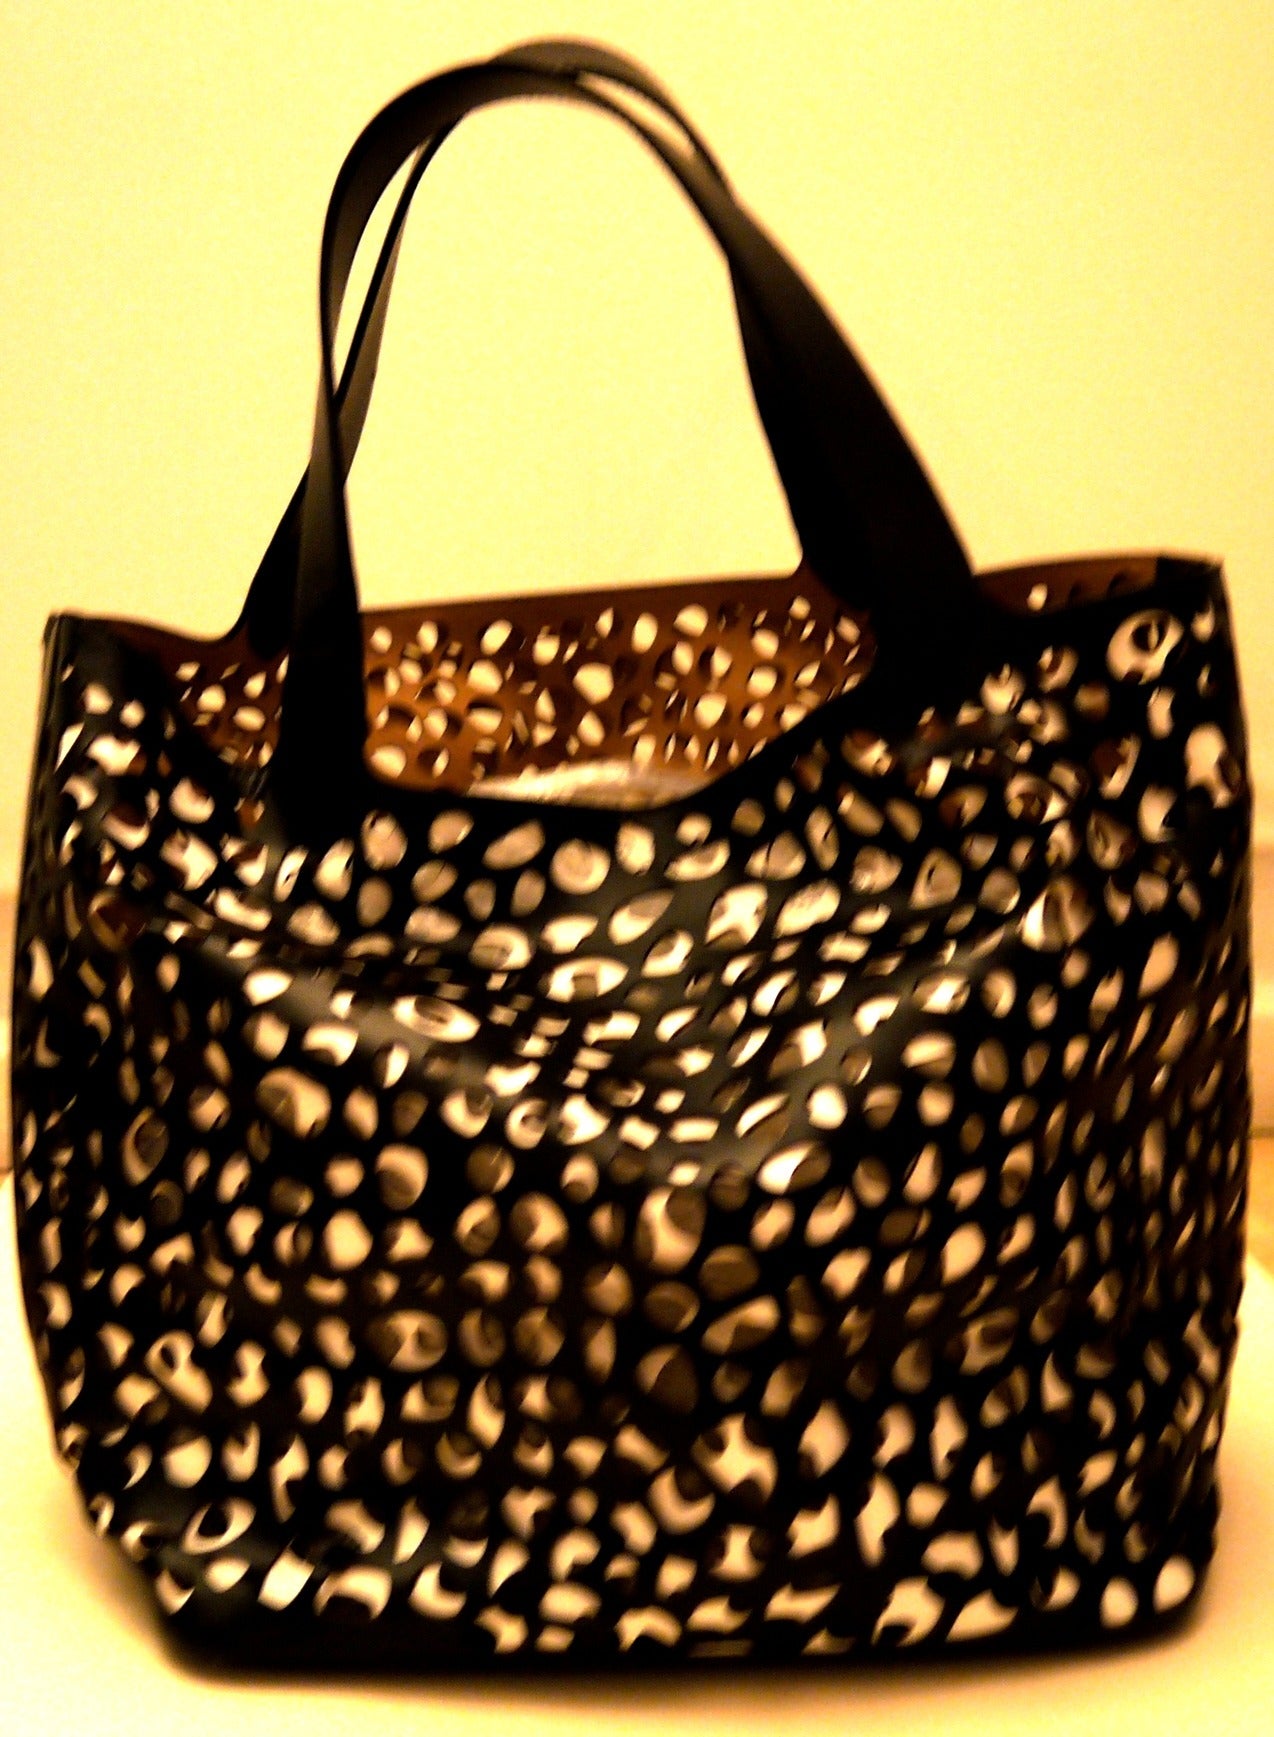 Gorgeous Alaia tote bag. A remarkable bag that has a layer of white leather with a holed pattern on the interior, and the exterior leather layer is a black leather with holes. The interior color of the bag is a beige. A gorgeous tote bag that makes